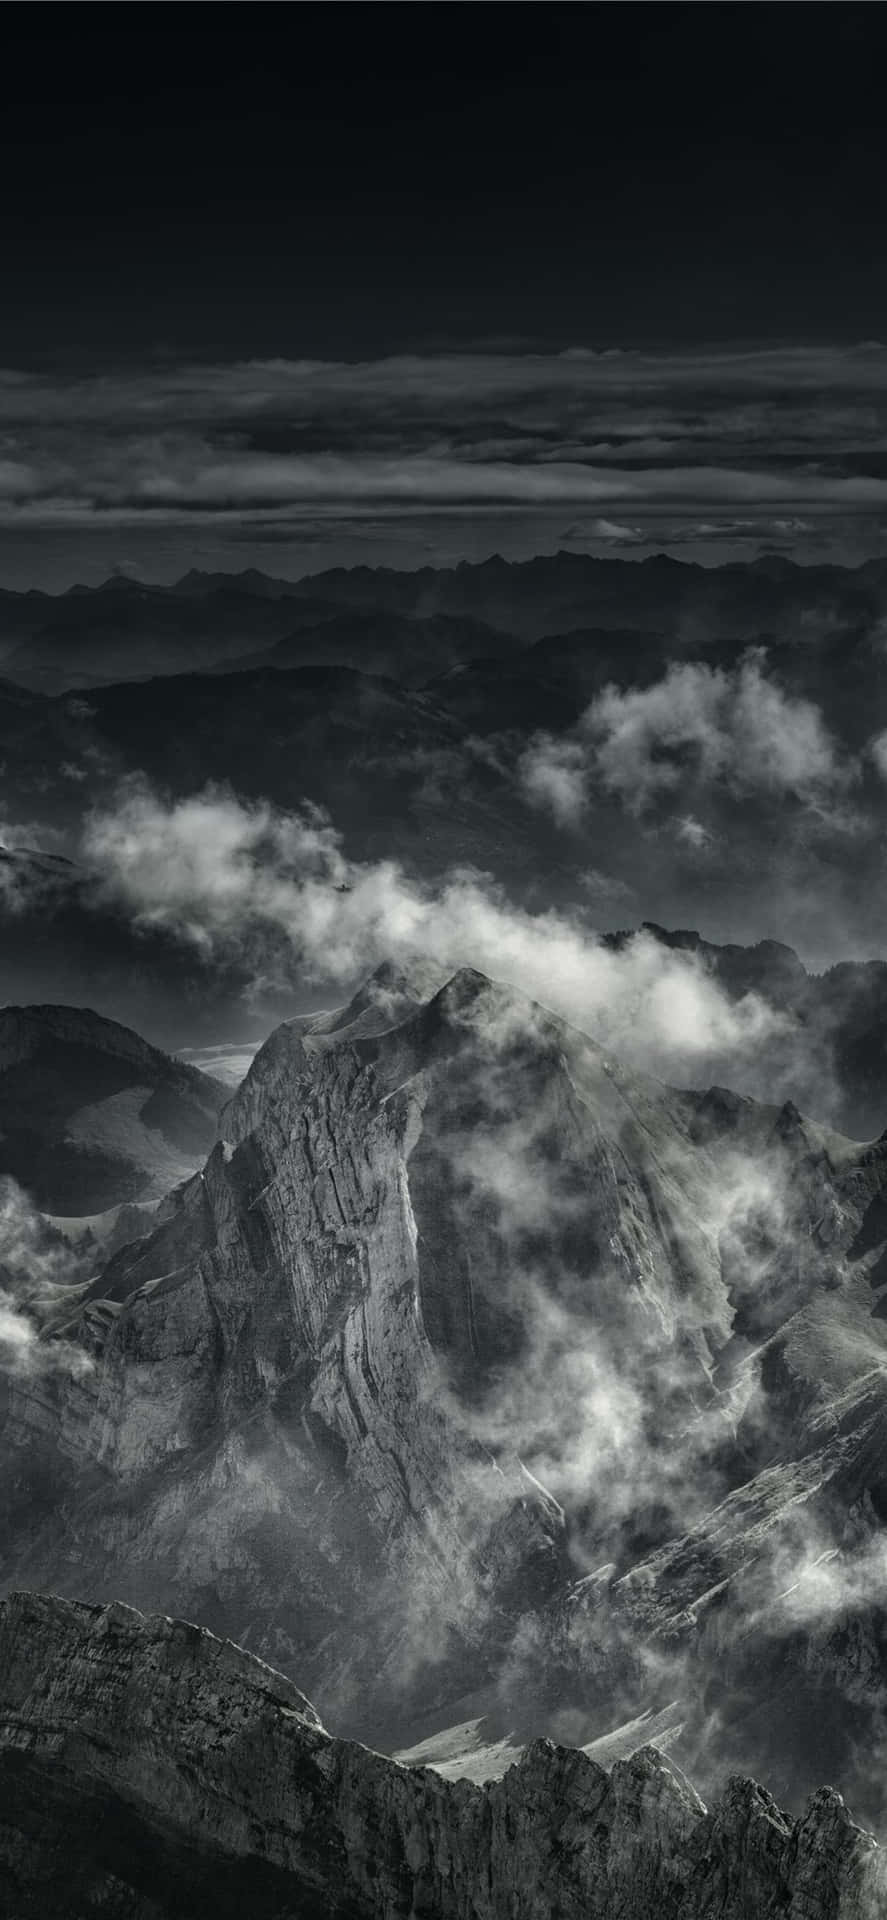 A Black And White Photo Of Clouds Over A Mountain Background